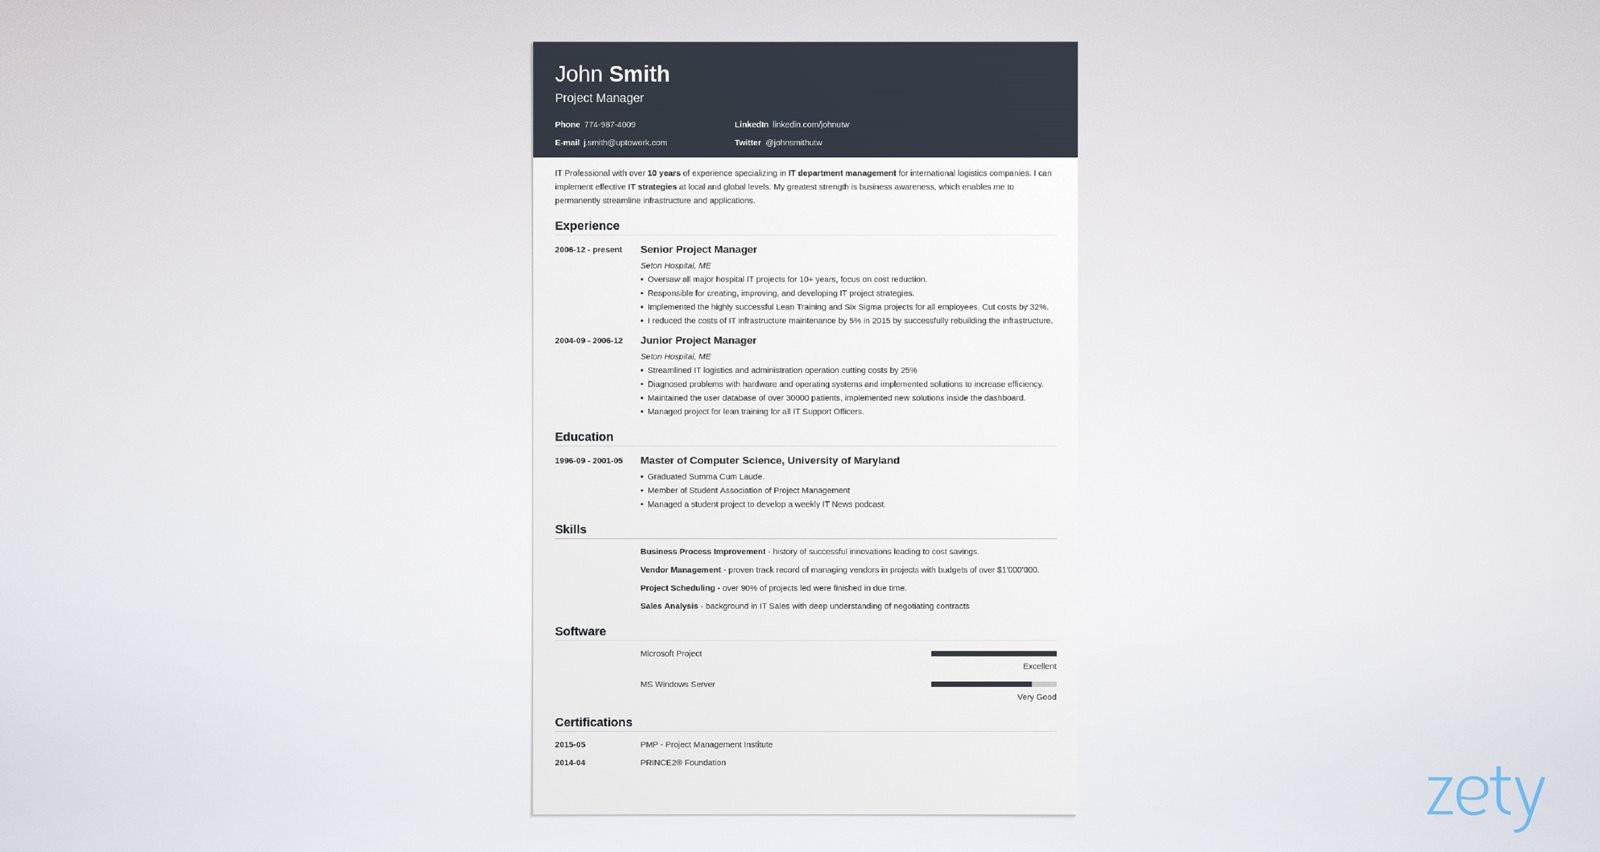 Resume Samples to Copy and Paste 15lancarrezekiq Blank Resume Templates & forms to Fill In